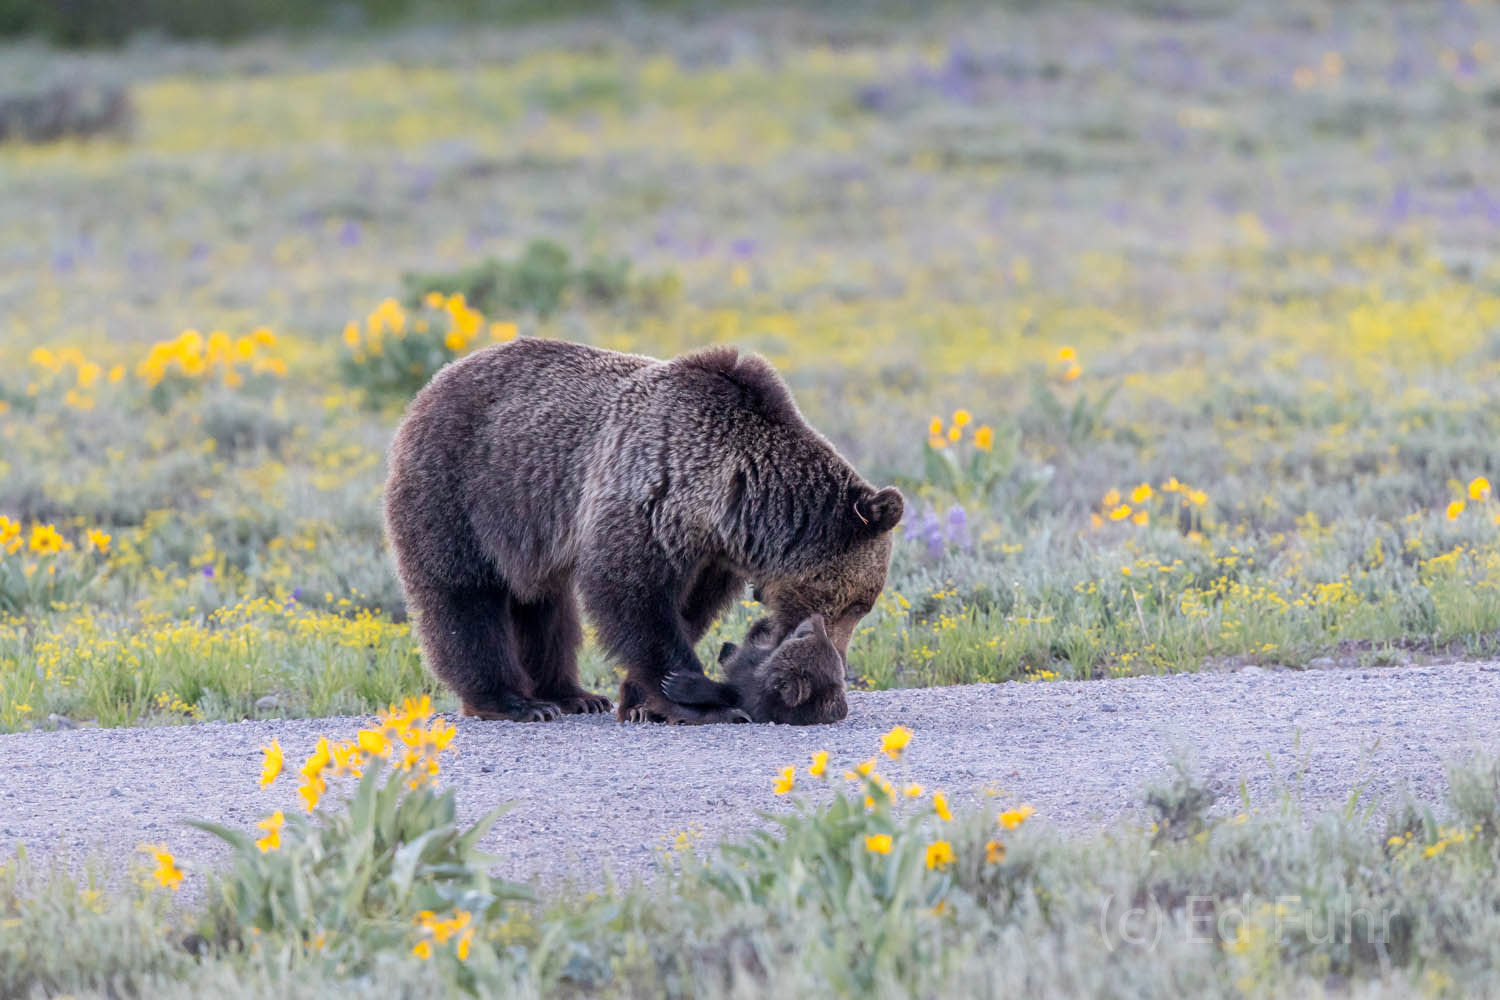 A bear cub enjoys some play with her big and beautiful mom, a grizzly nicknamed Blondie.